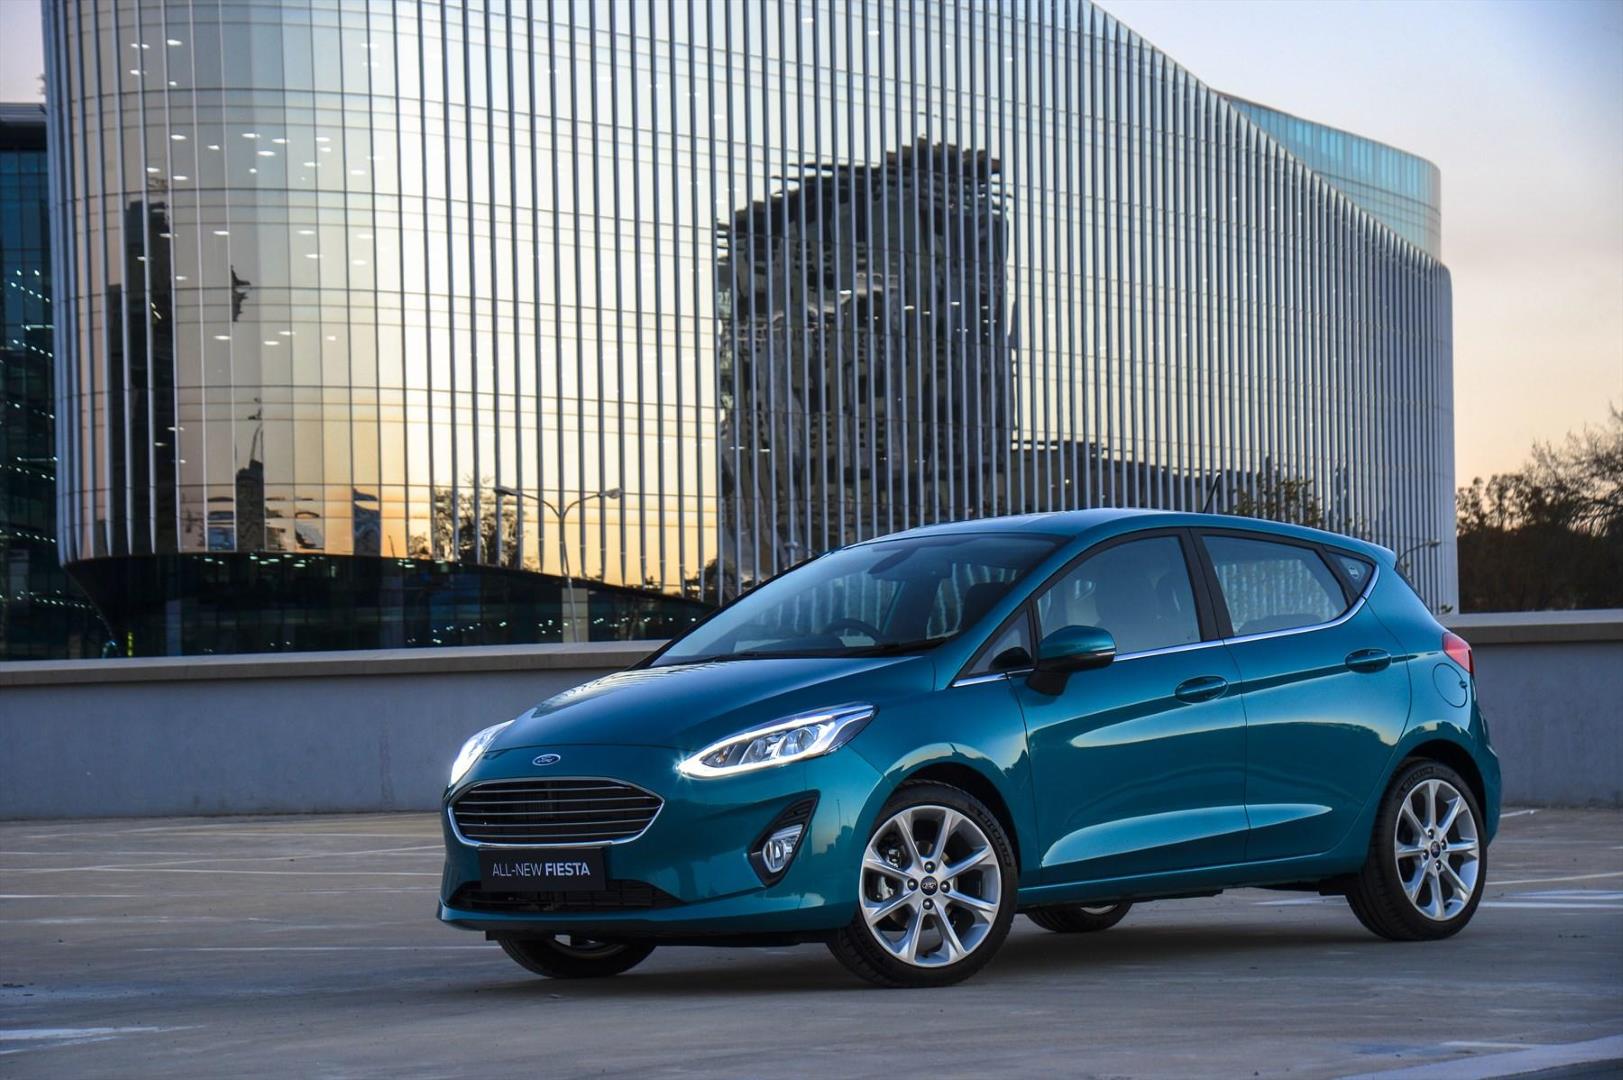 Ford Fiesta Which Is Better Petrol Or Diesel Motoring News And Advice Autotrader